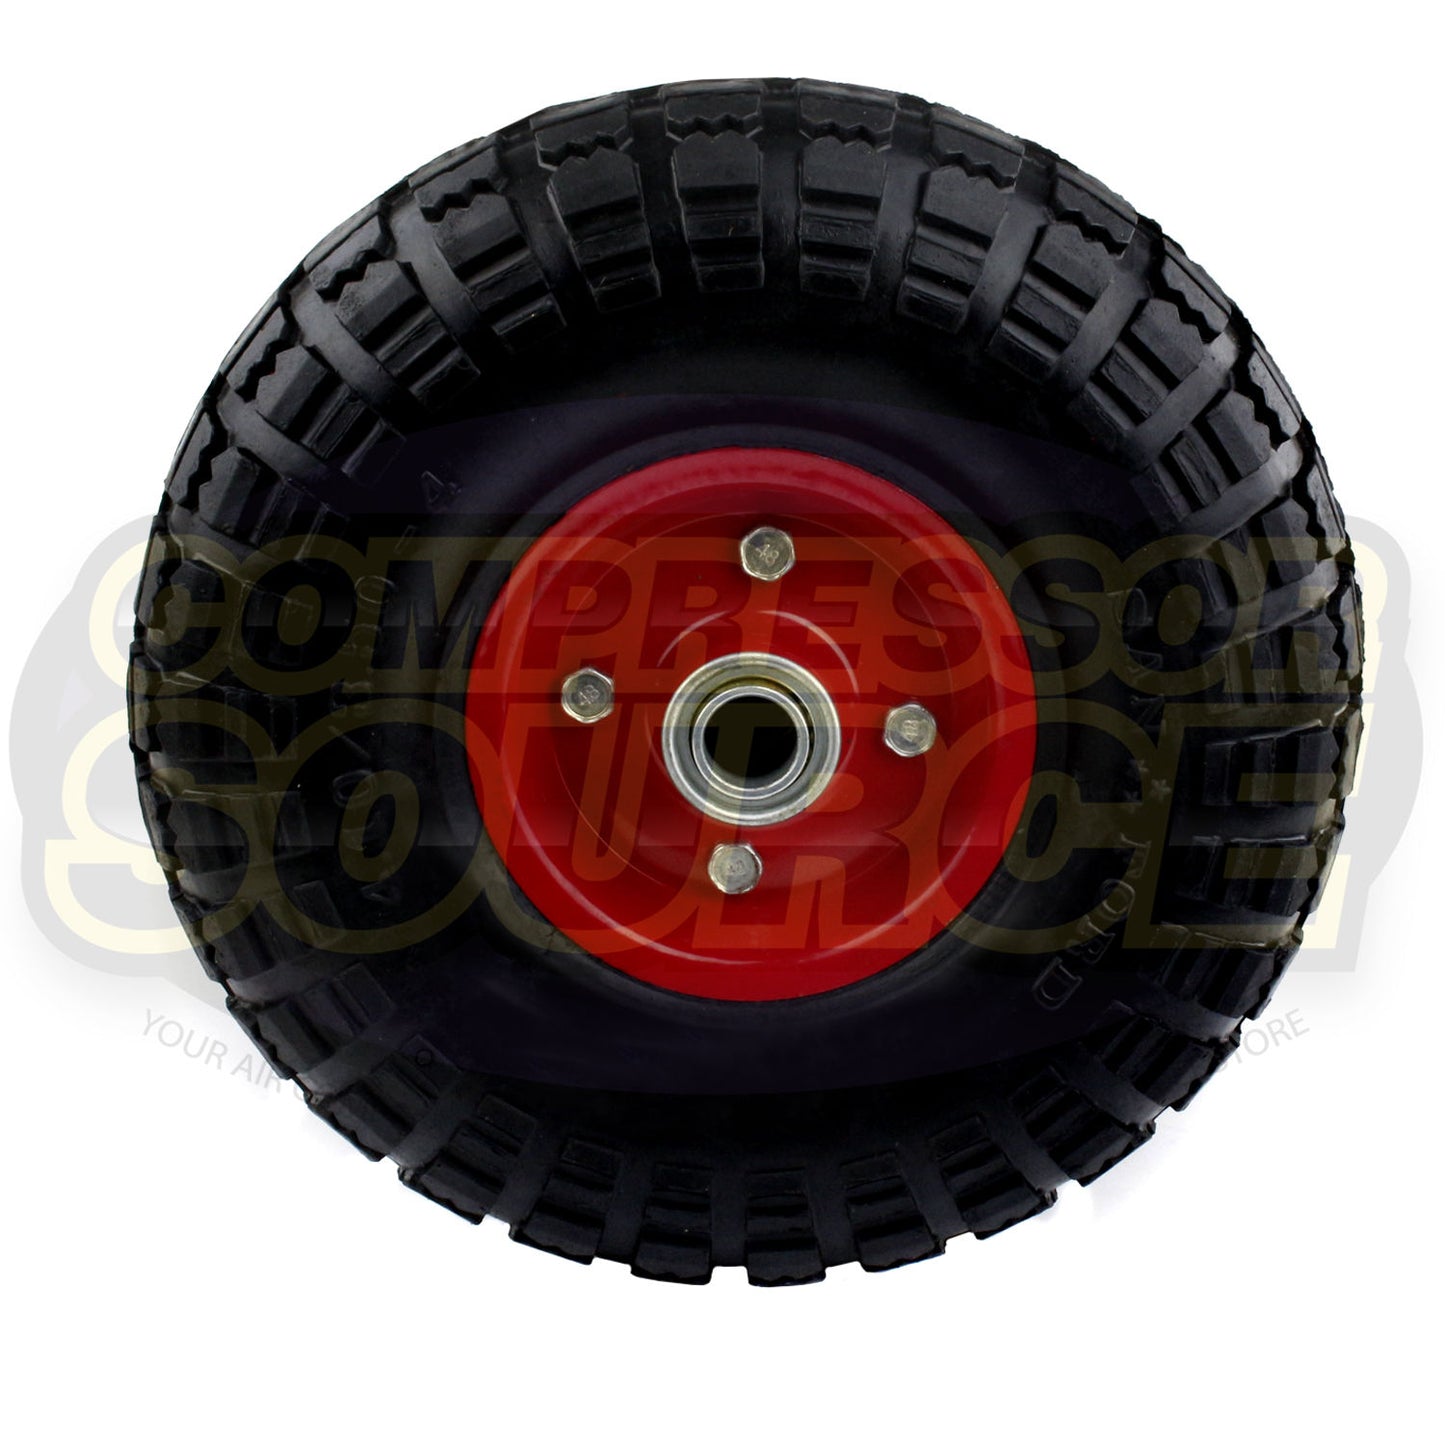 New 2402038 Puma Air Compressor Replacement Wheel & Tire Assembly Solid Rubber